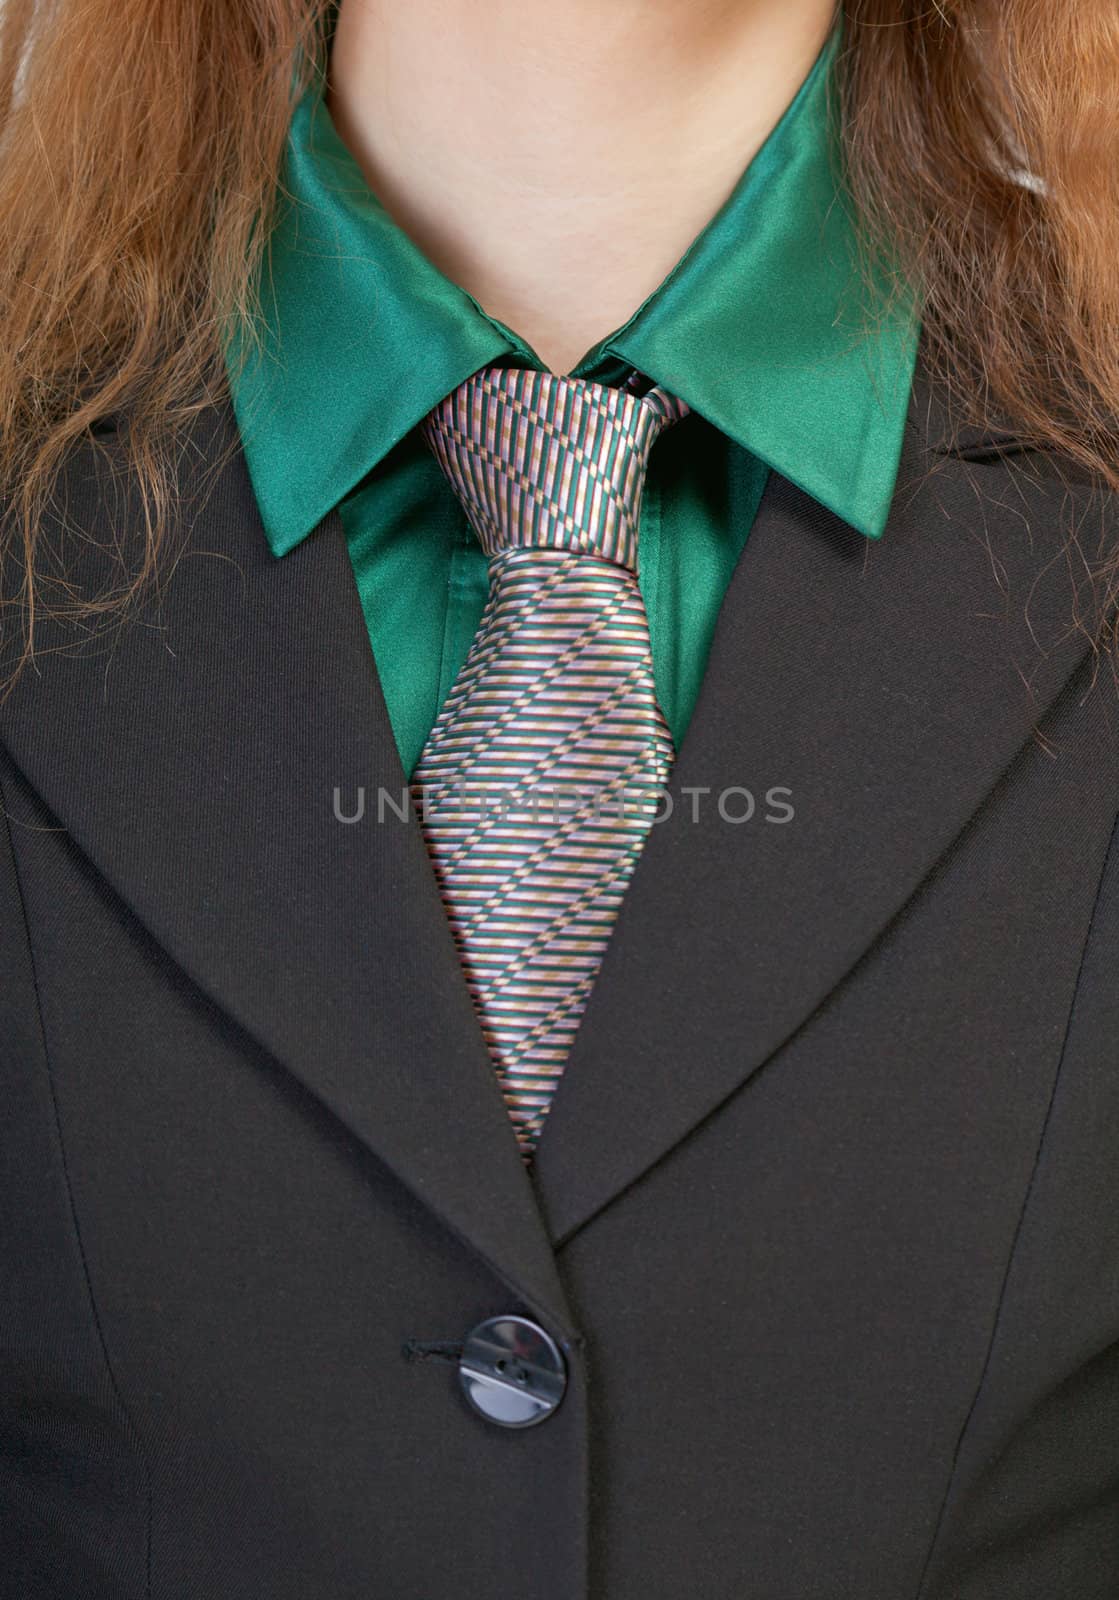 Fragment of a female business suit - a collar and a tie